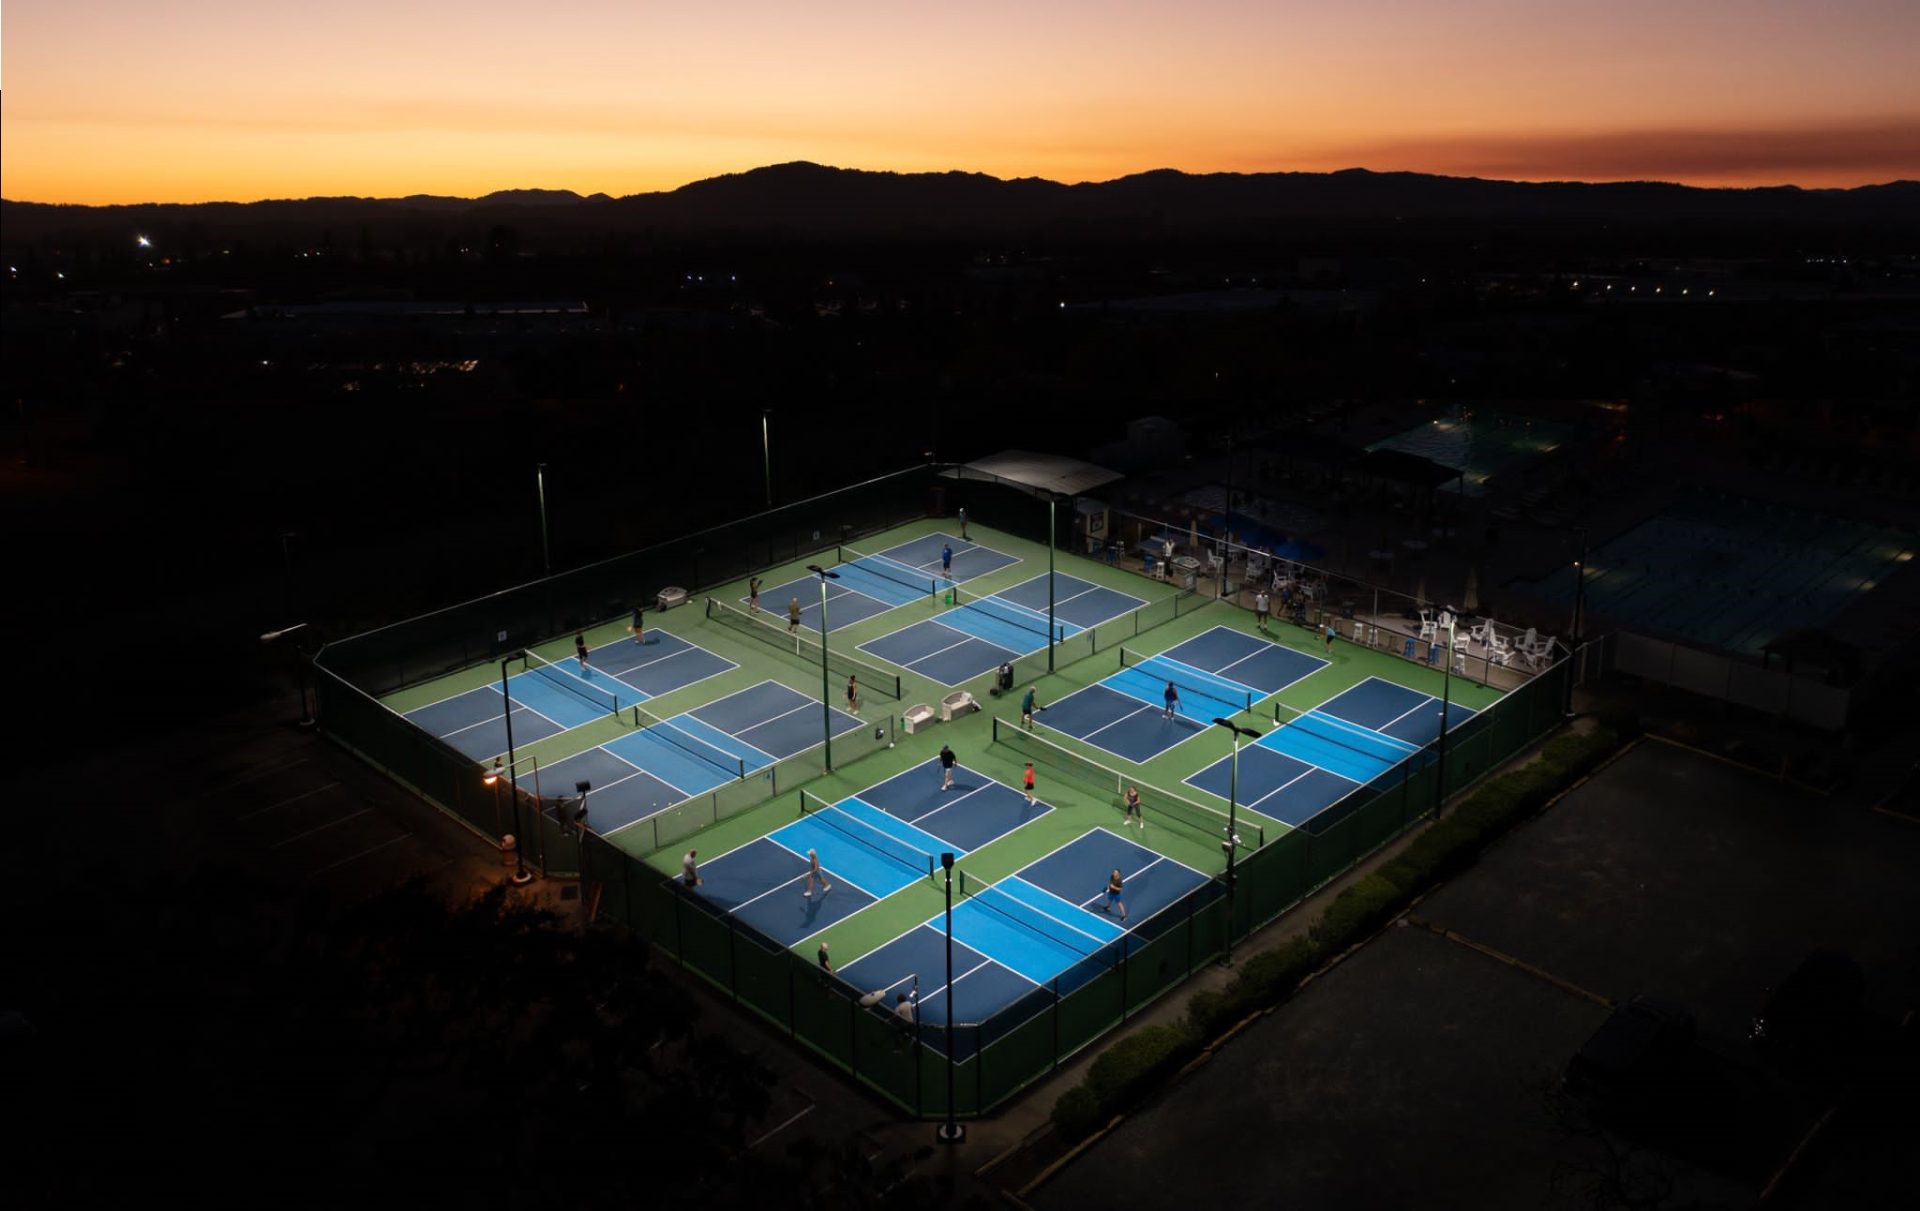 A drones photographs the Pickleball courts at Airport Health Club with a sunset.